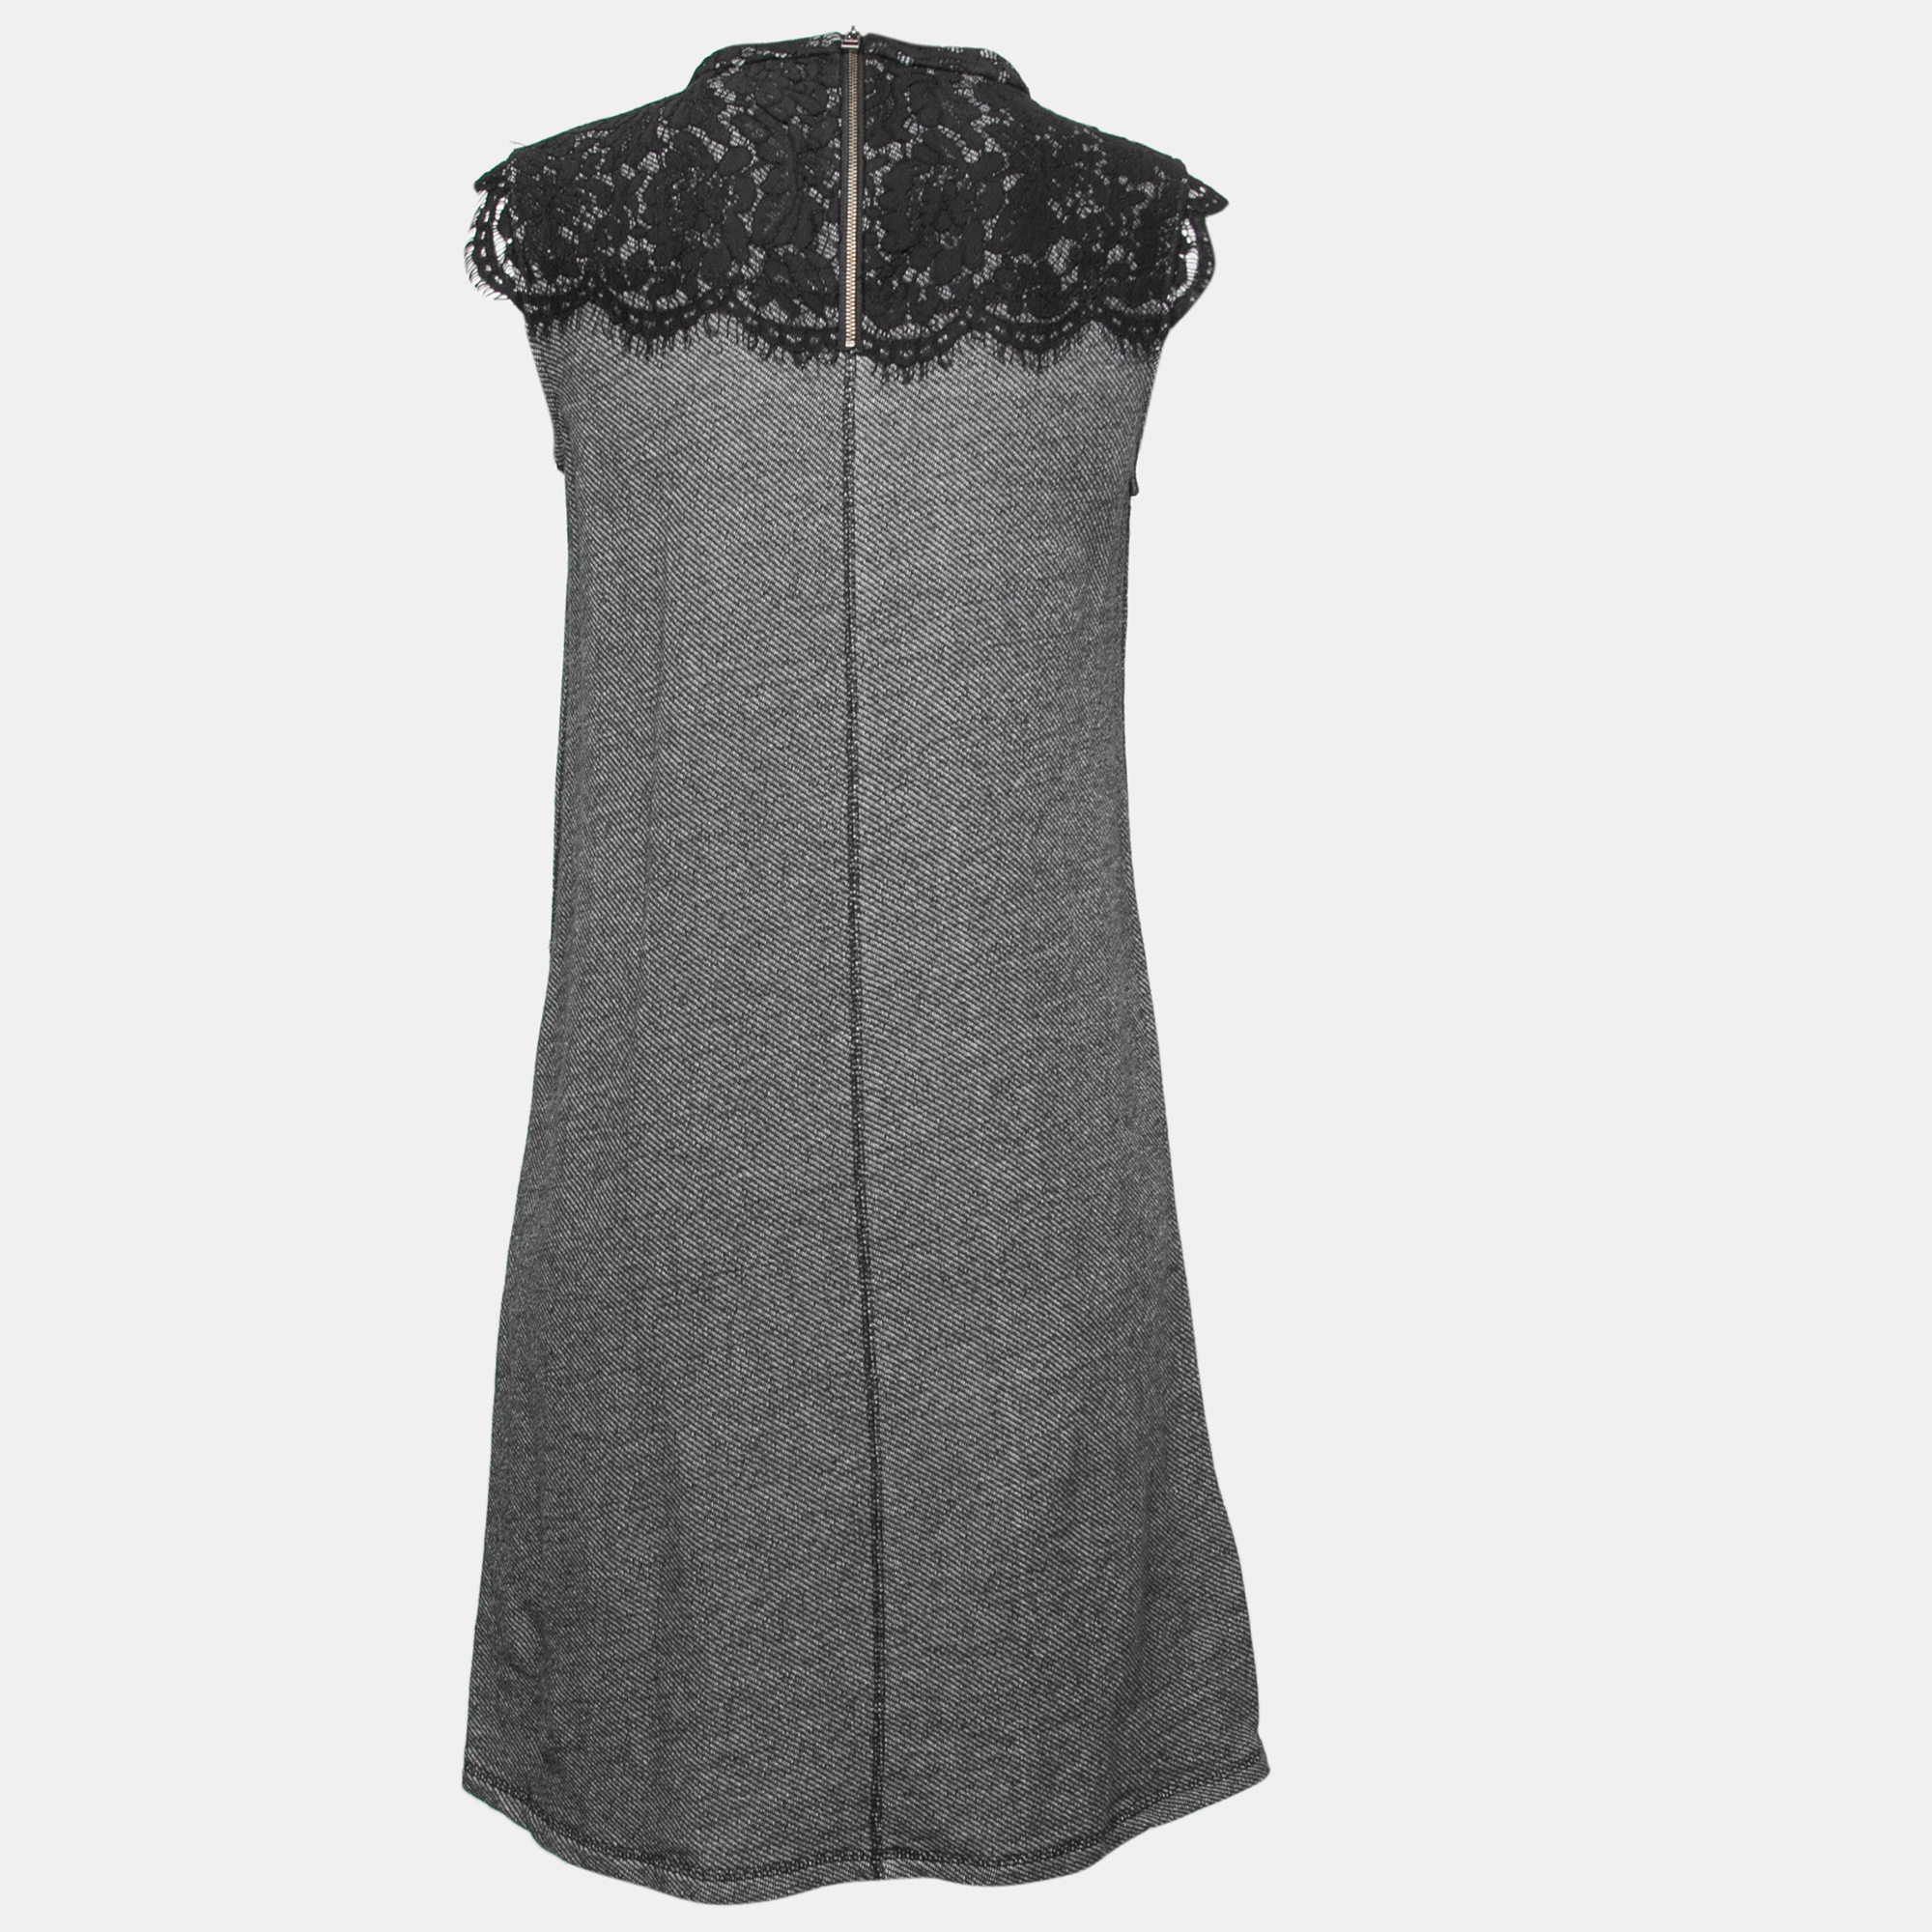 Sea Grey Wool and Lace Neckline Detail Sleeveless Dress S  - buy with discount